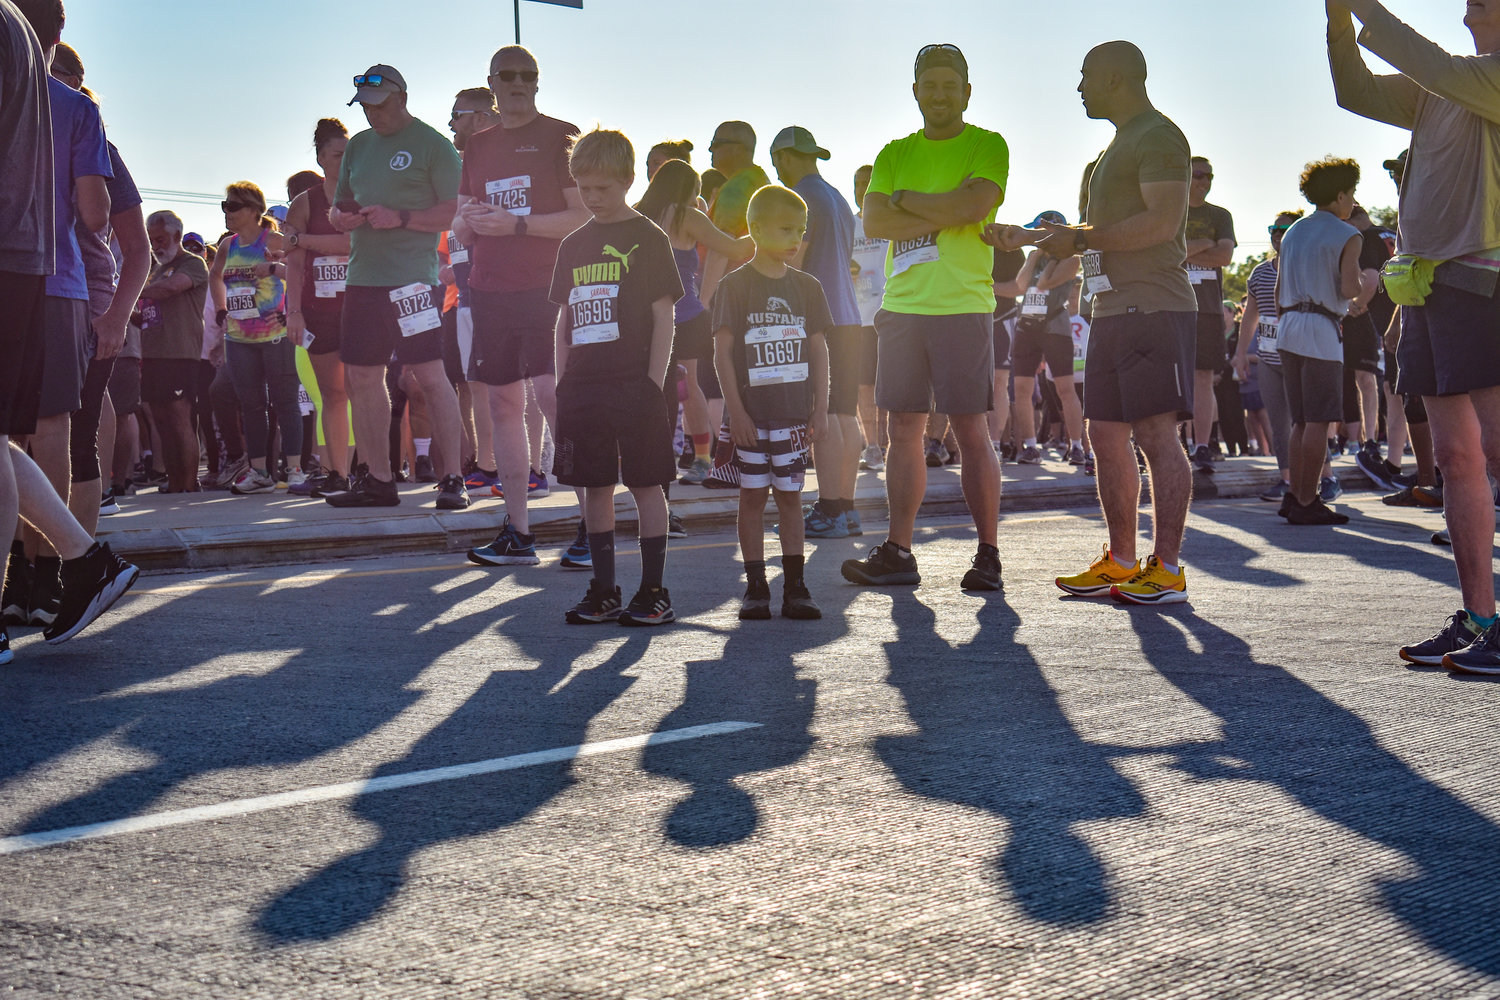 From left, young racers Daniel and Ellis Dziuban cast an impactful shadow next to Billy Gibson and Jeremy Dziuban as they wait to participate in the 2022 Boilermaker 5K.